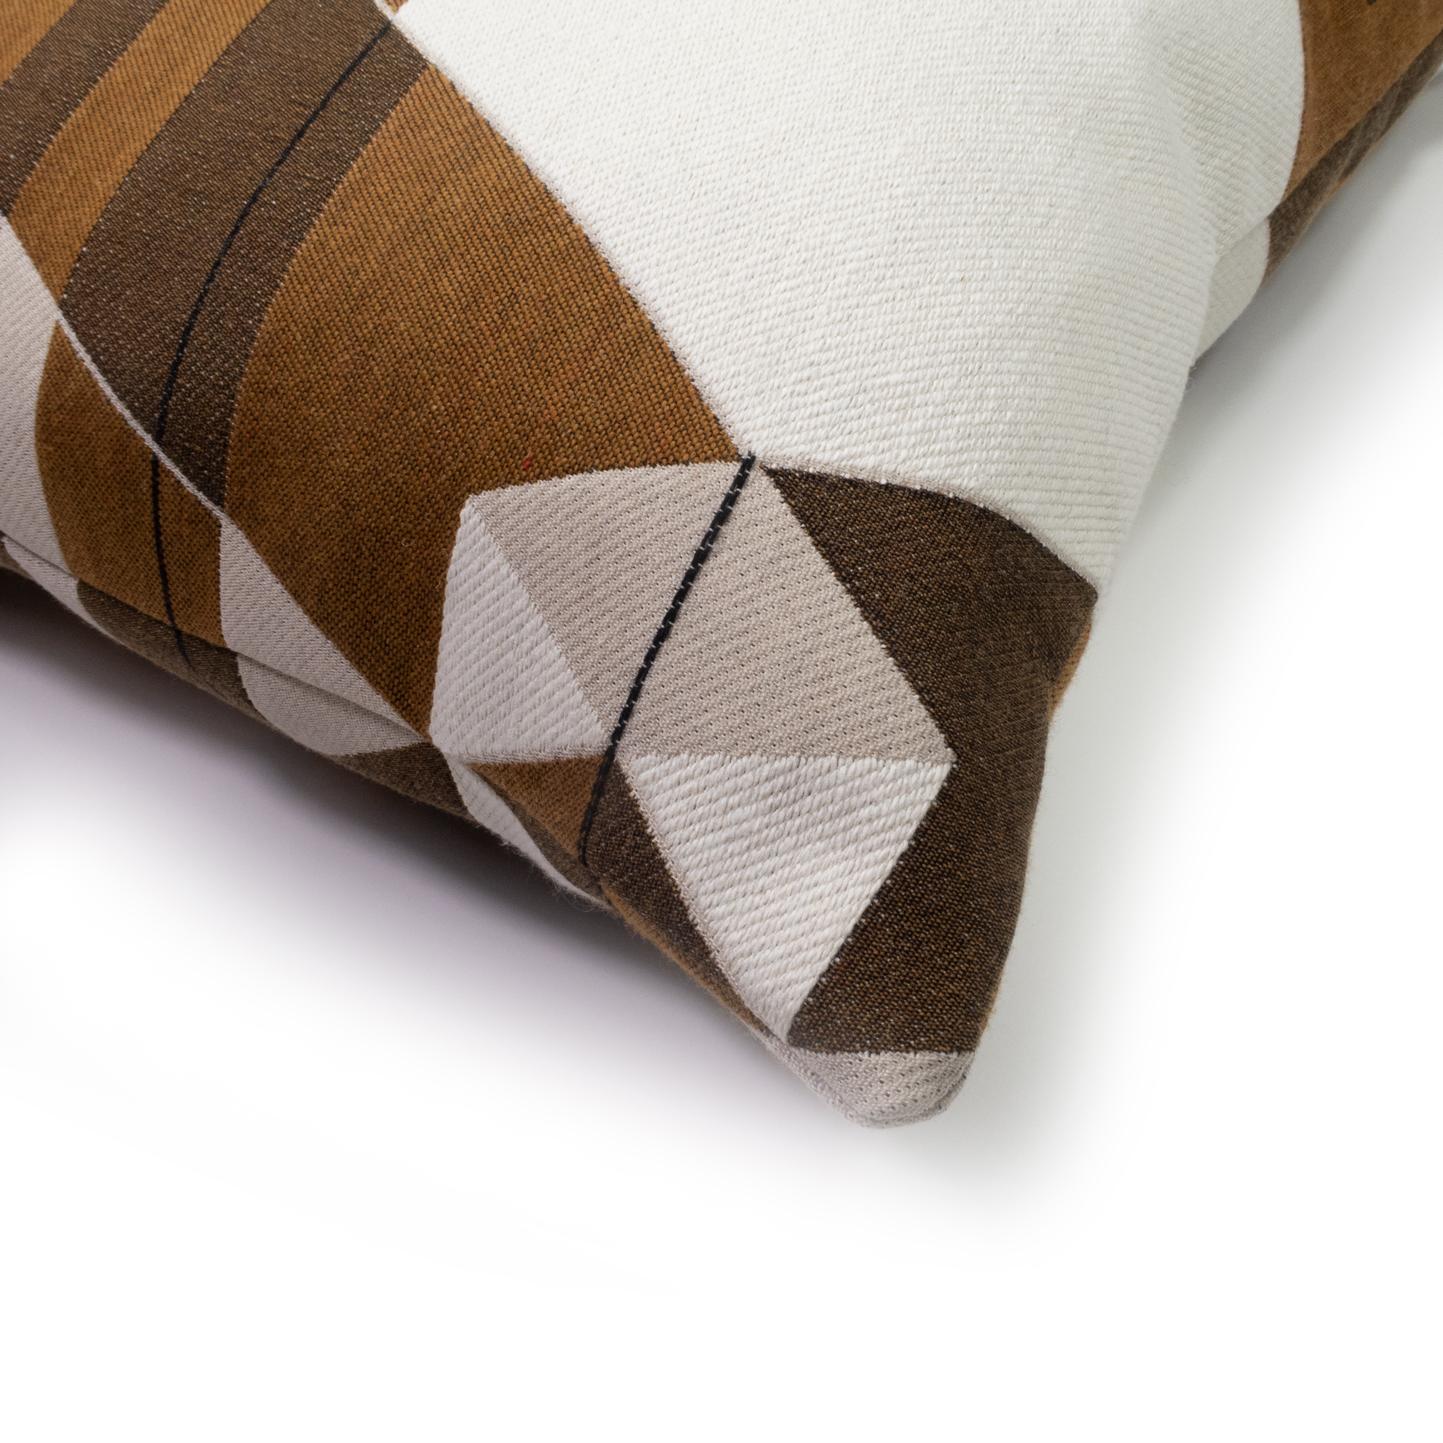 Our Coup de Foudre or ‘Love at first sight’ fabric is art in action. With a nod to Picasso’s Ma Jolie, the various shades of brown interlace to tell a tale of love’s first sweet embrace. 

Made from a combination of high-end Martindale quality